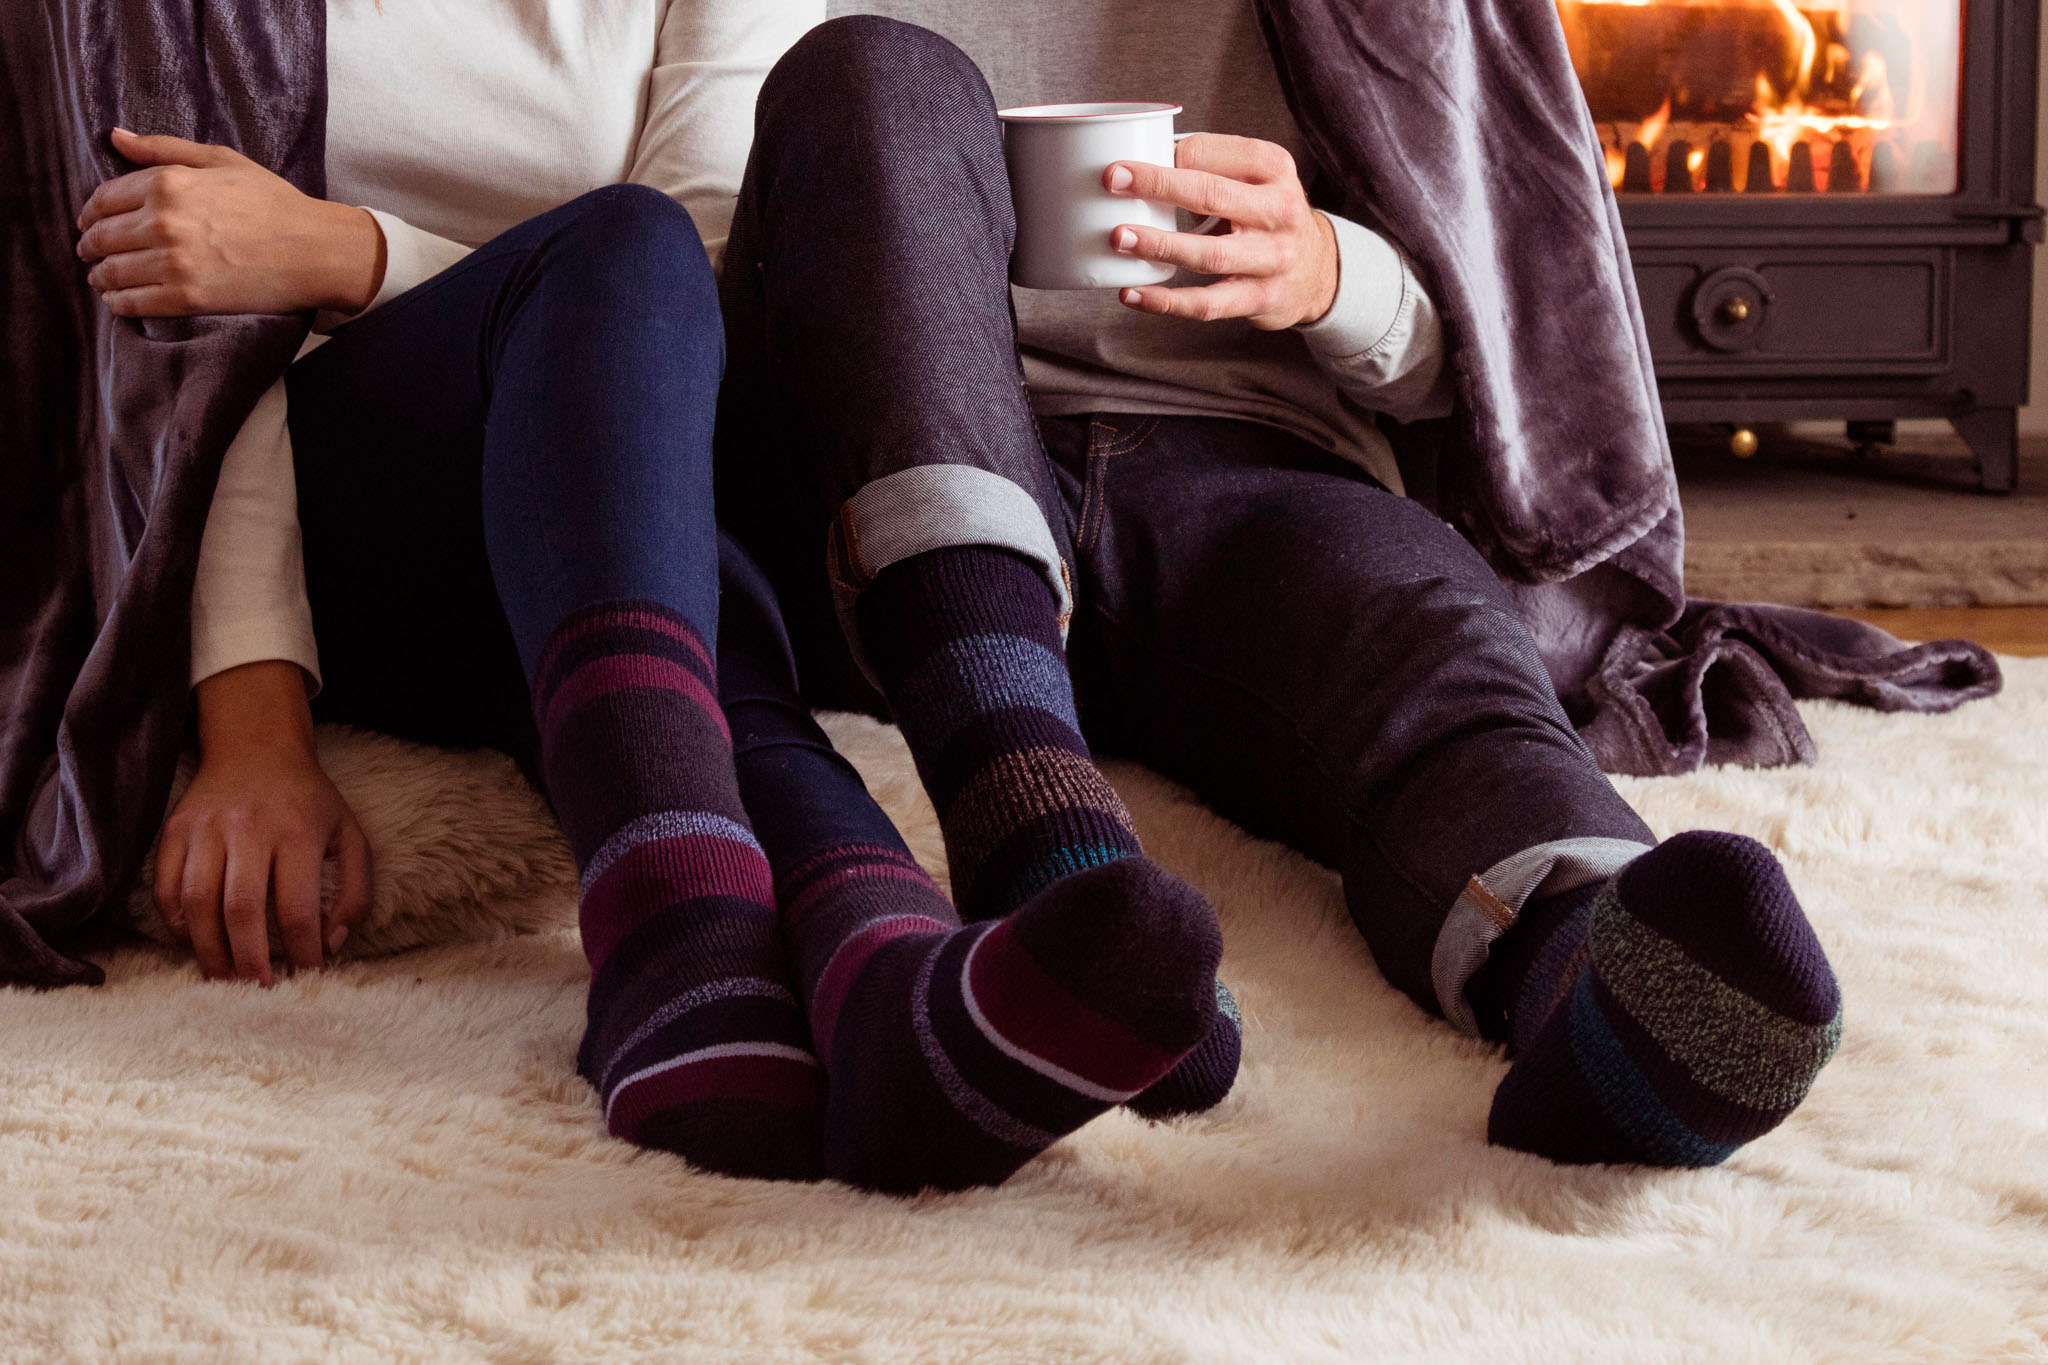 Outerwear 101: Which Socks & Why?